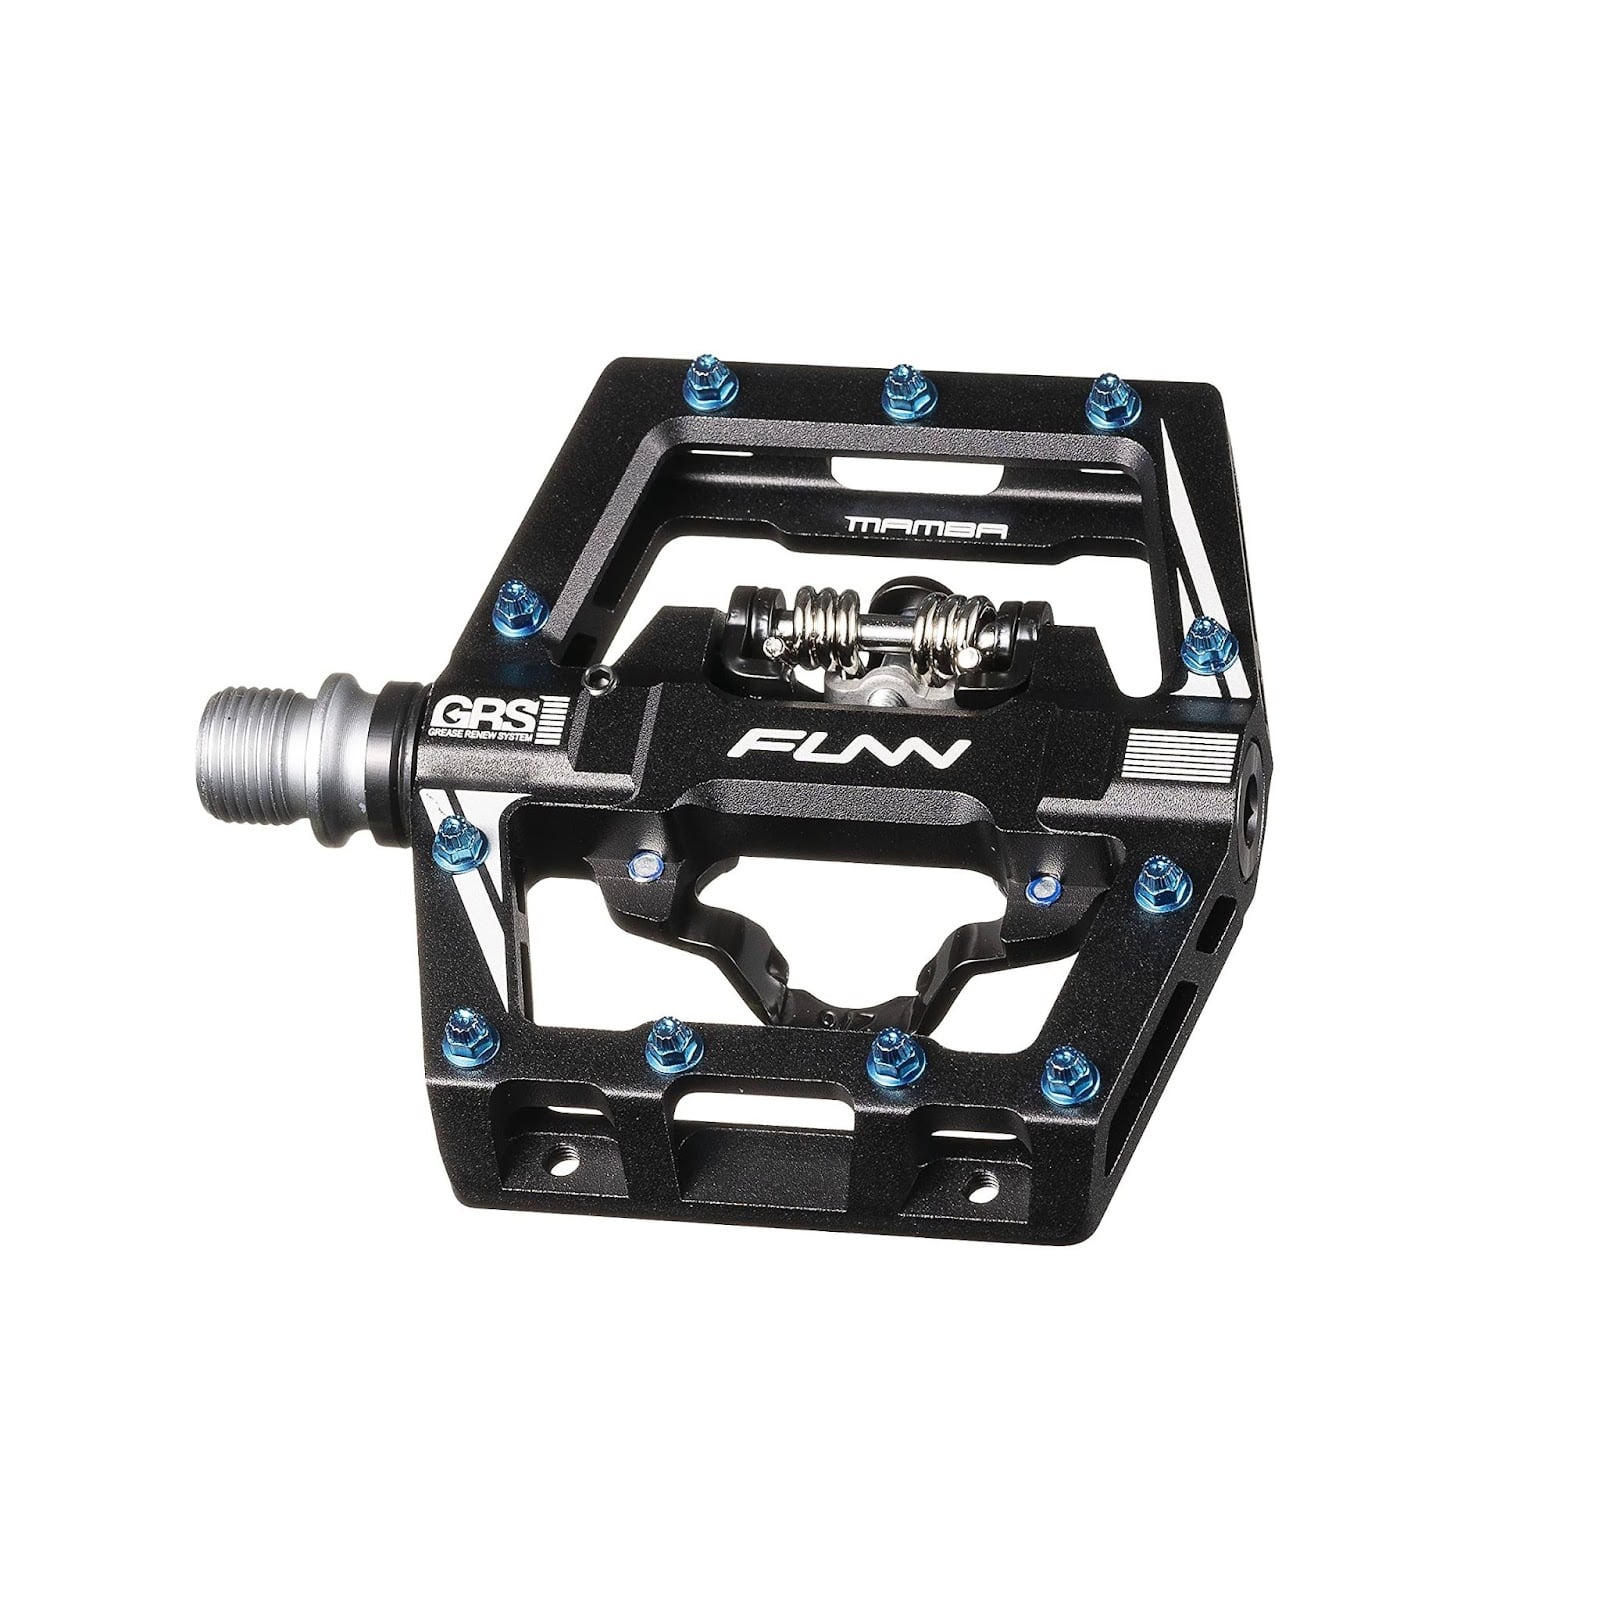 Clipless pedals like these allow for the rider to maintain complete control of pedaling by having their feet attached to the pedals.